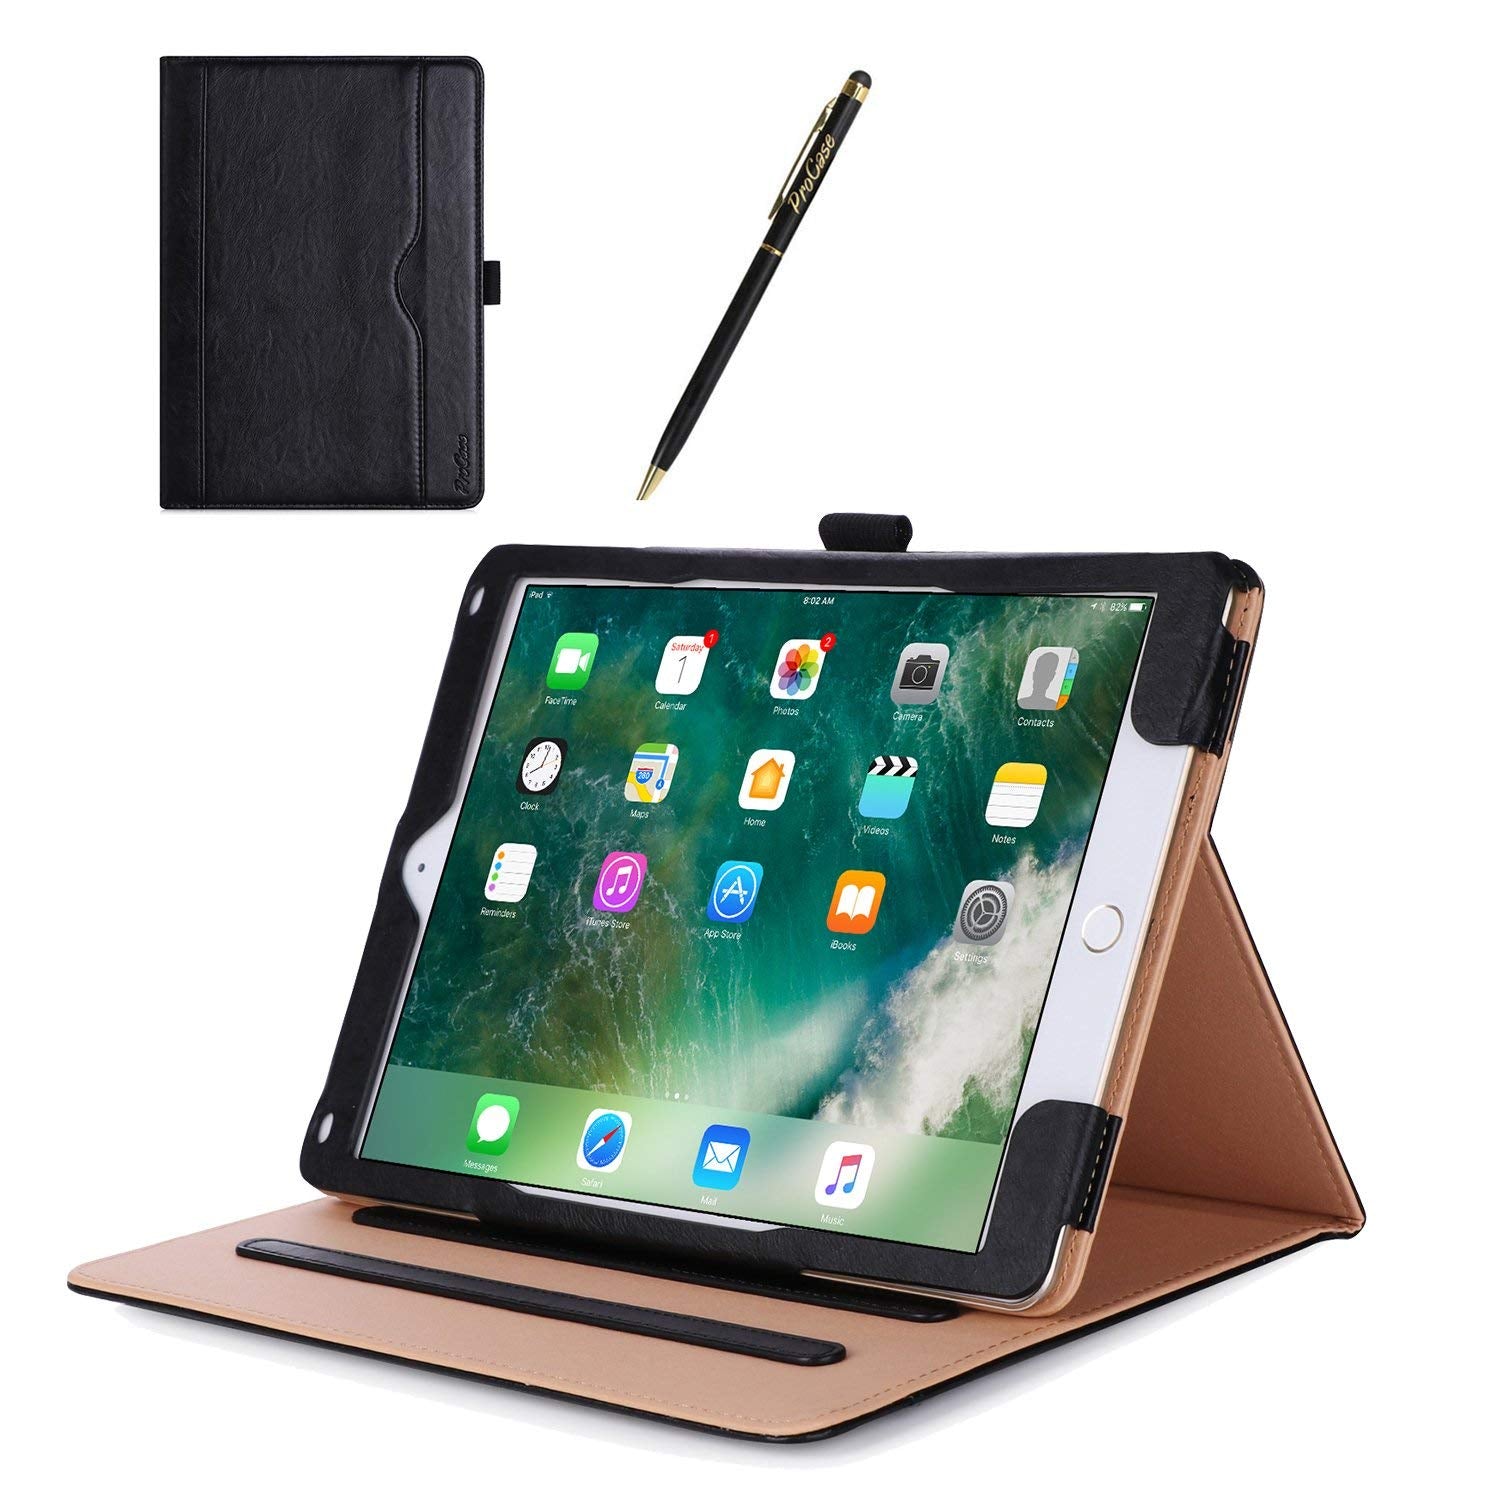 Protections Apple iPad 6 (A1893)